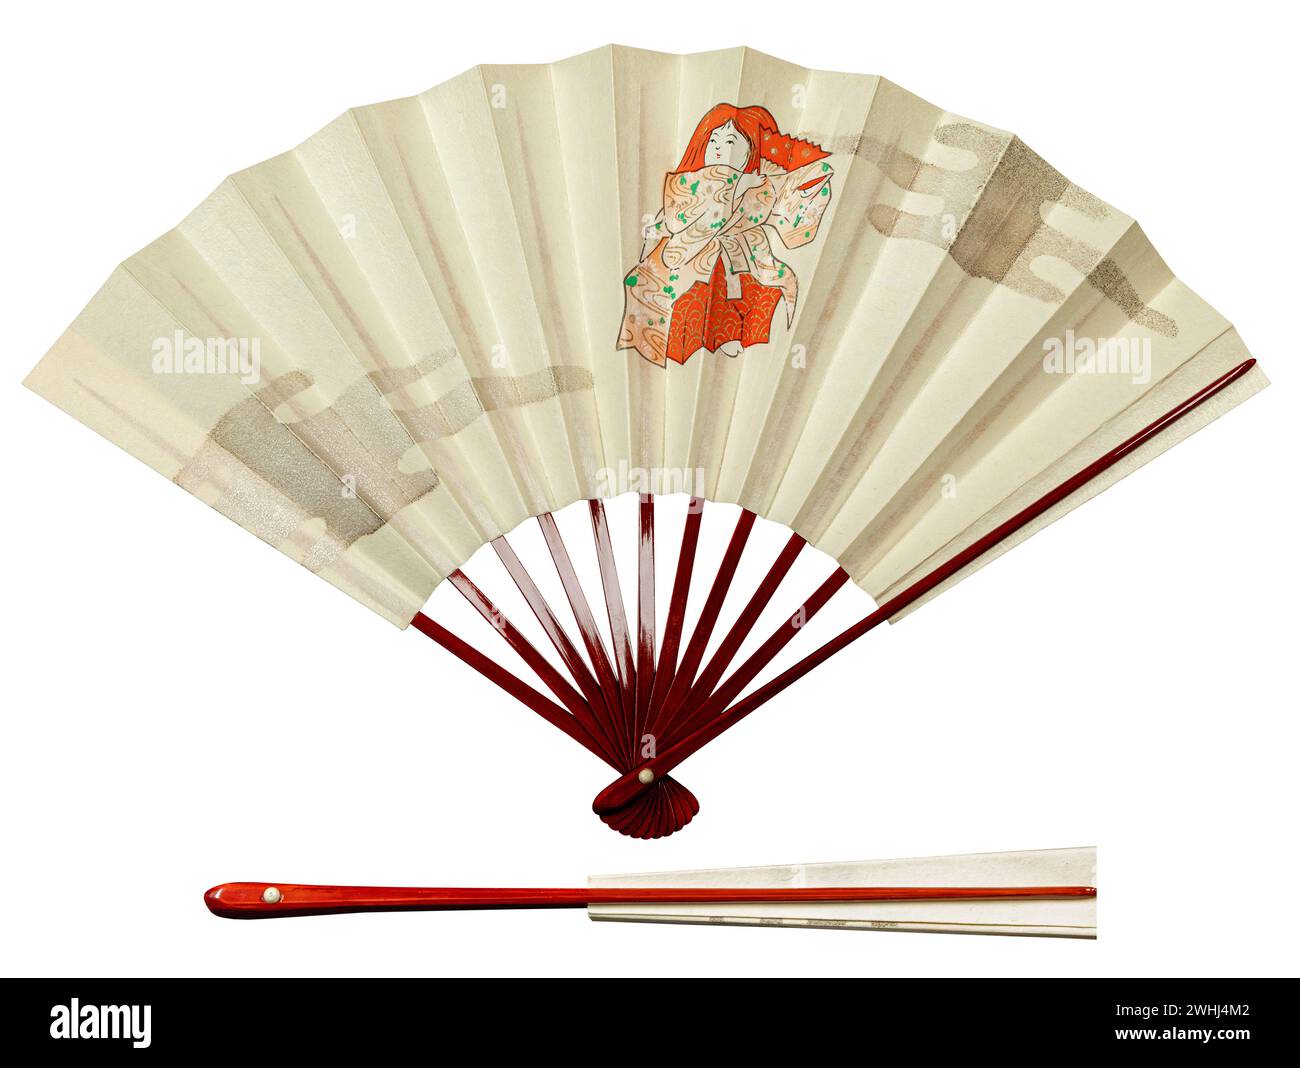 Japanese traditional vintage hand fan from paper and bamboo with red ornament, isolated on white. Stock Photo